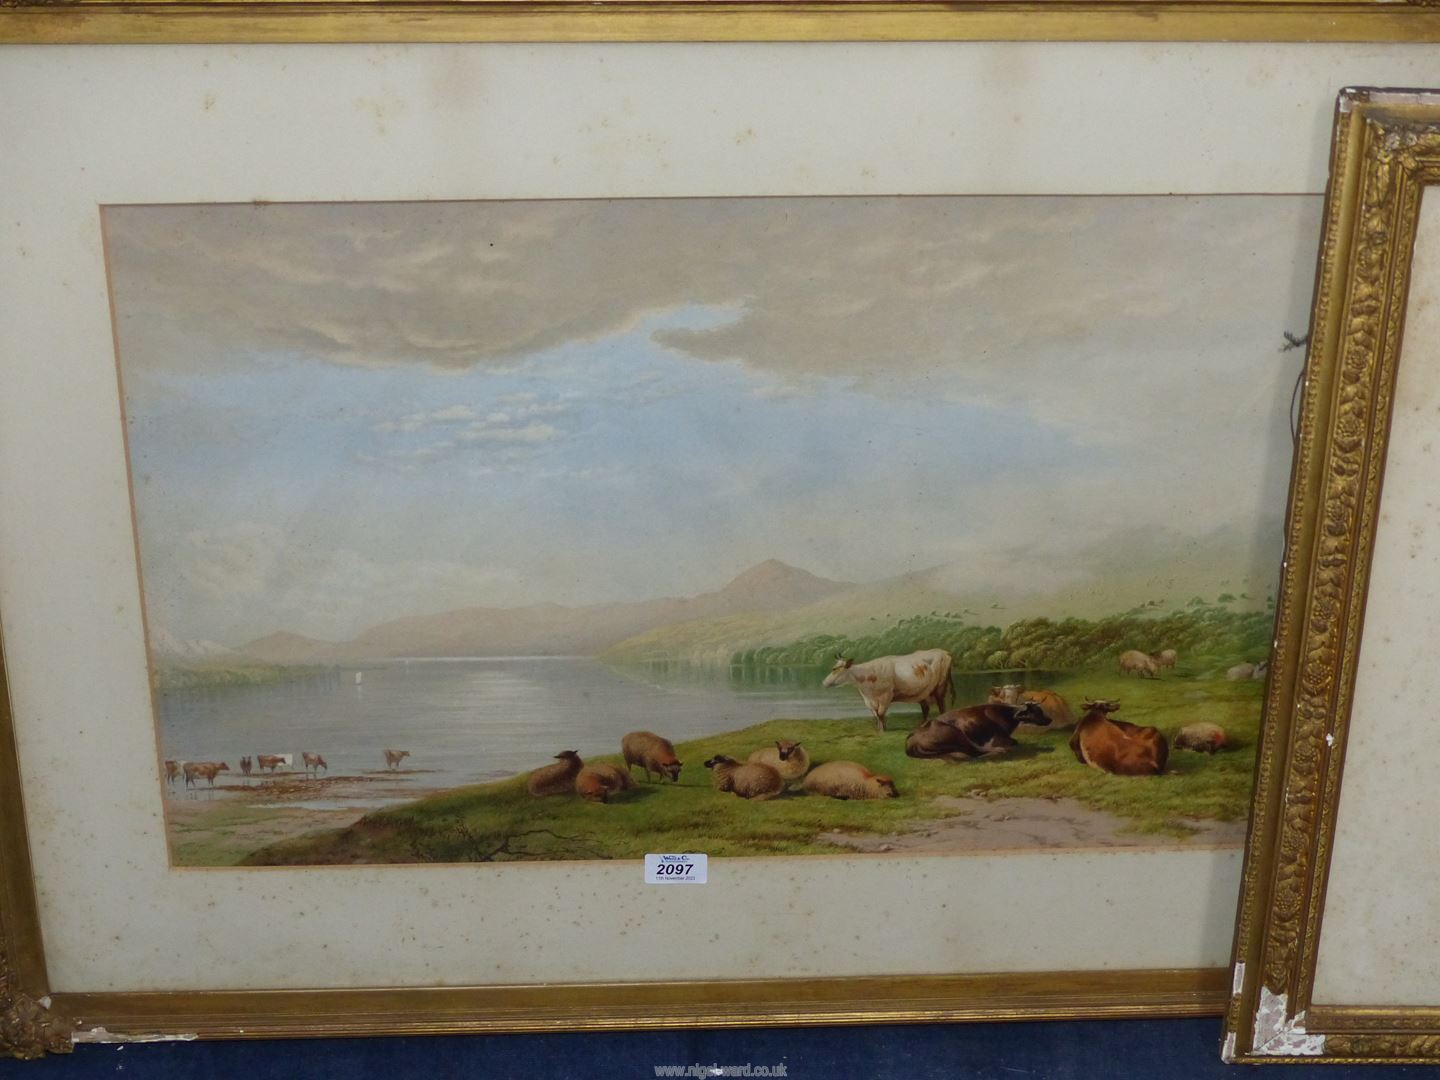 Thomas Wainwright 1815-1887 "Cattle" and "Sheep", two Lithographs in original frames, a/f. - Image 2 of 4